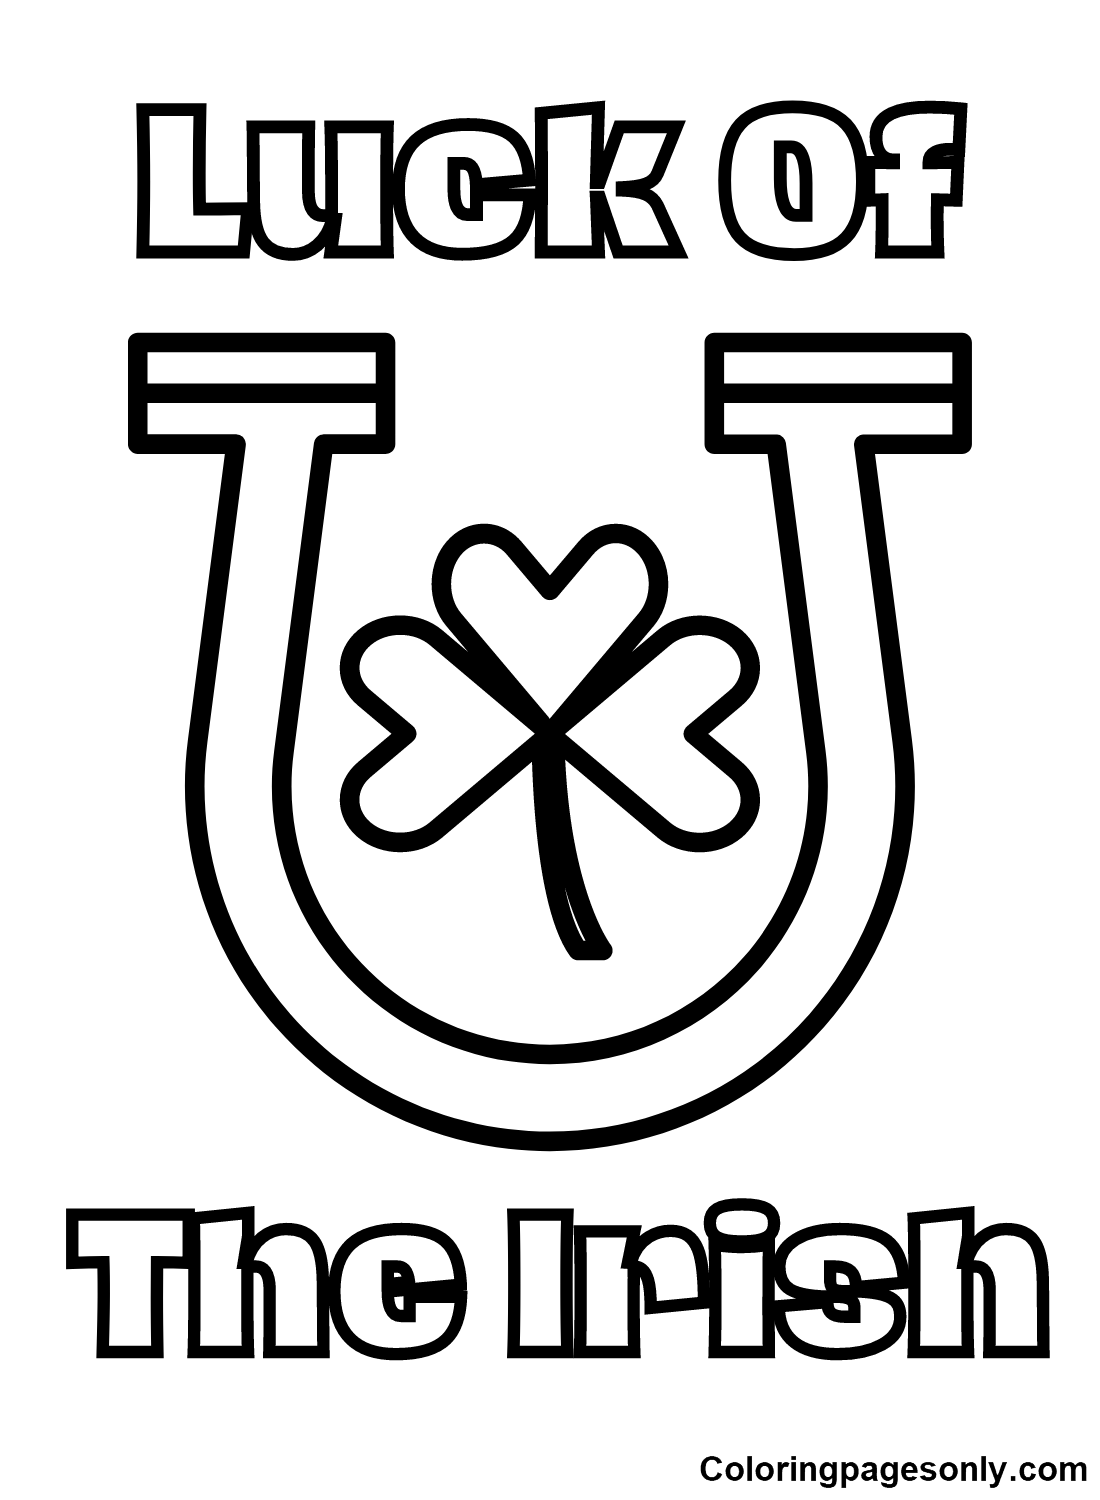 Luck of the Irish Coloring Pages